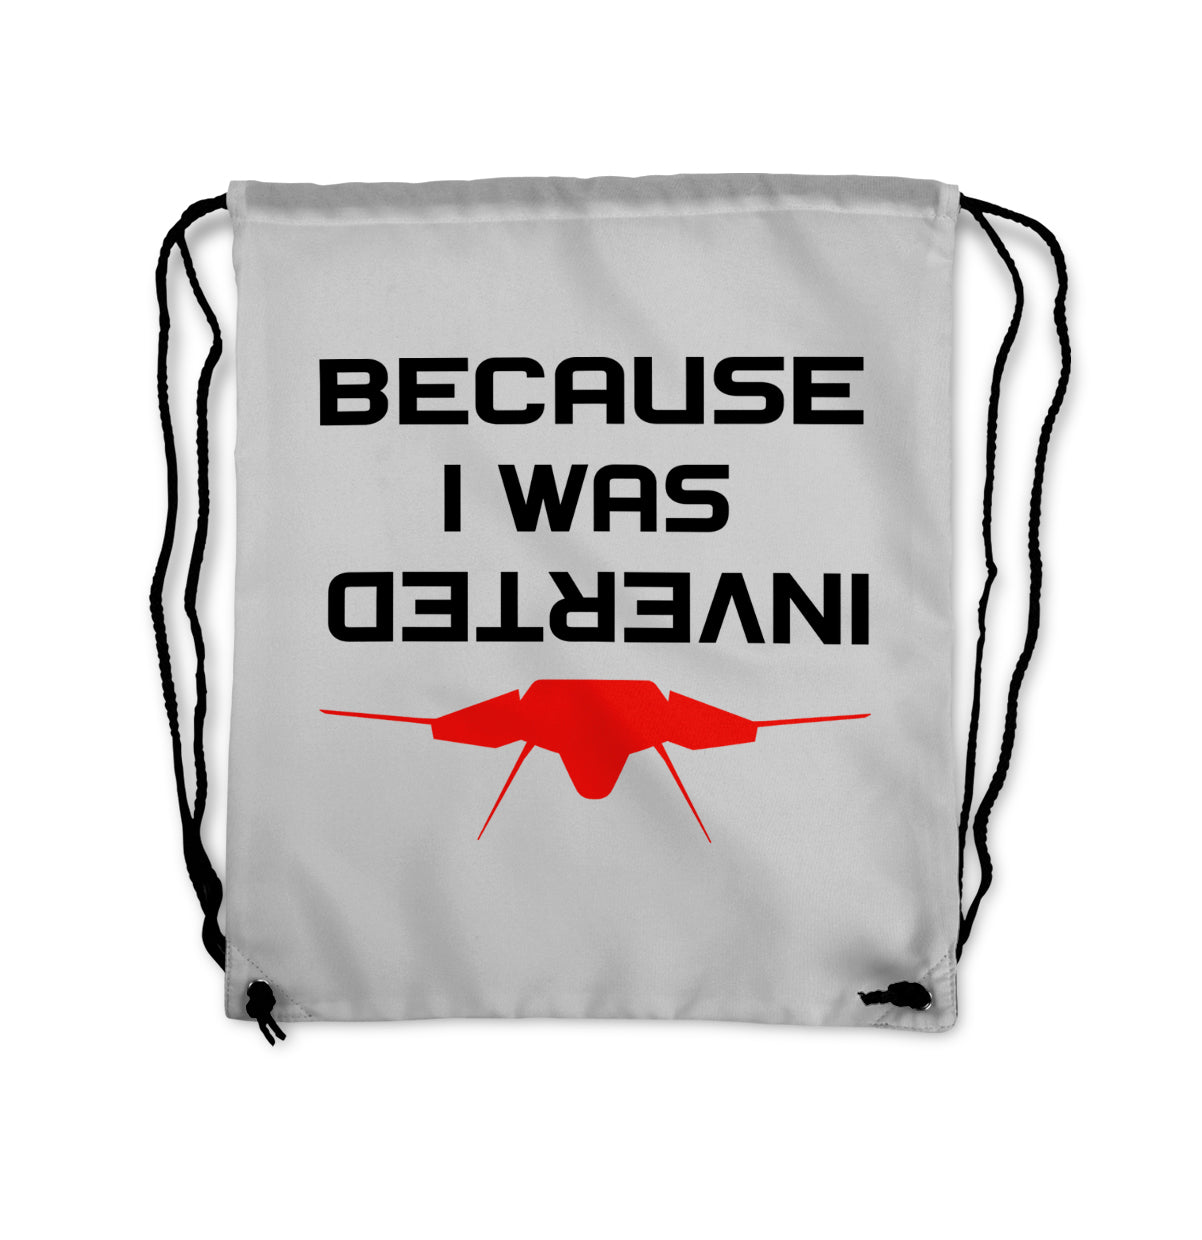 Because I was Inverted Designed Drawstring Bags